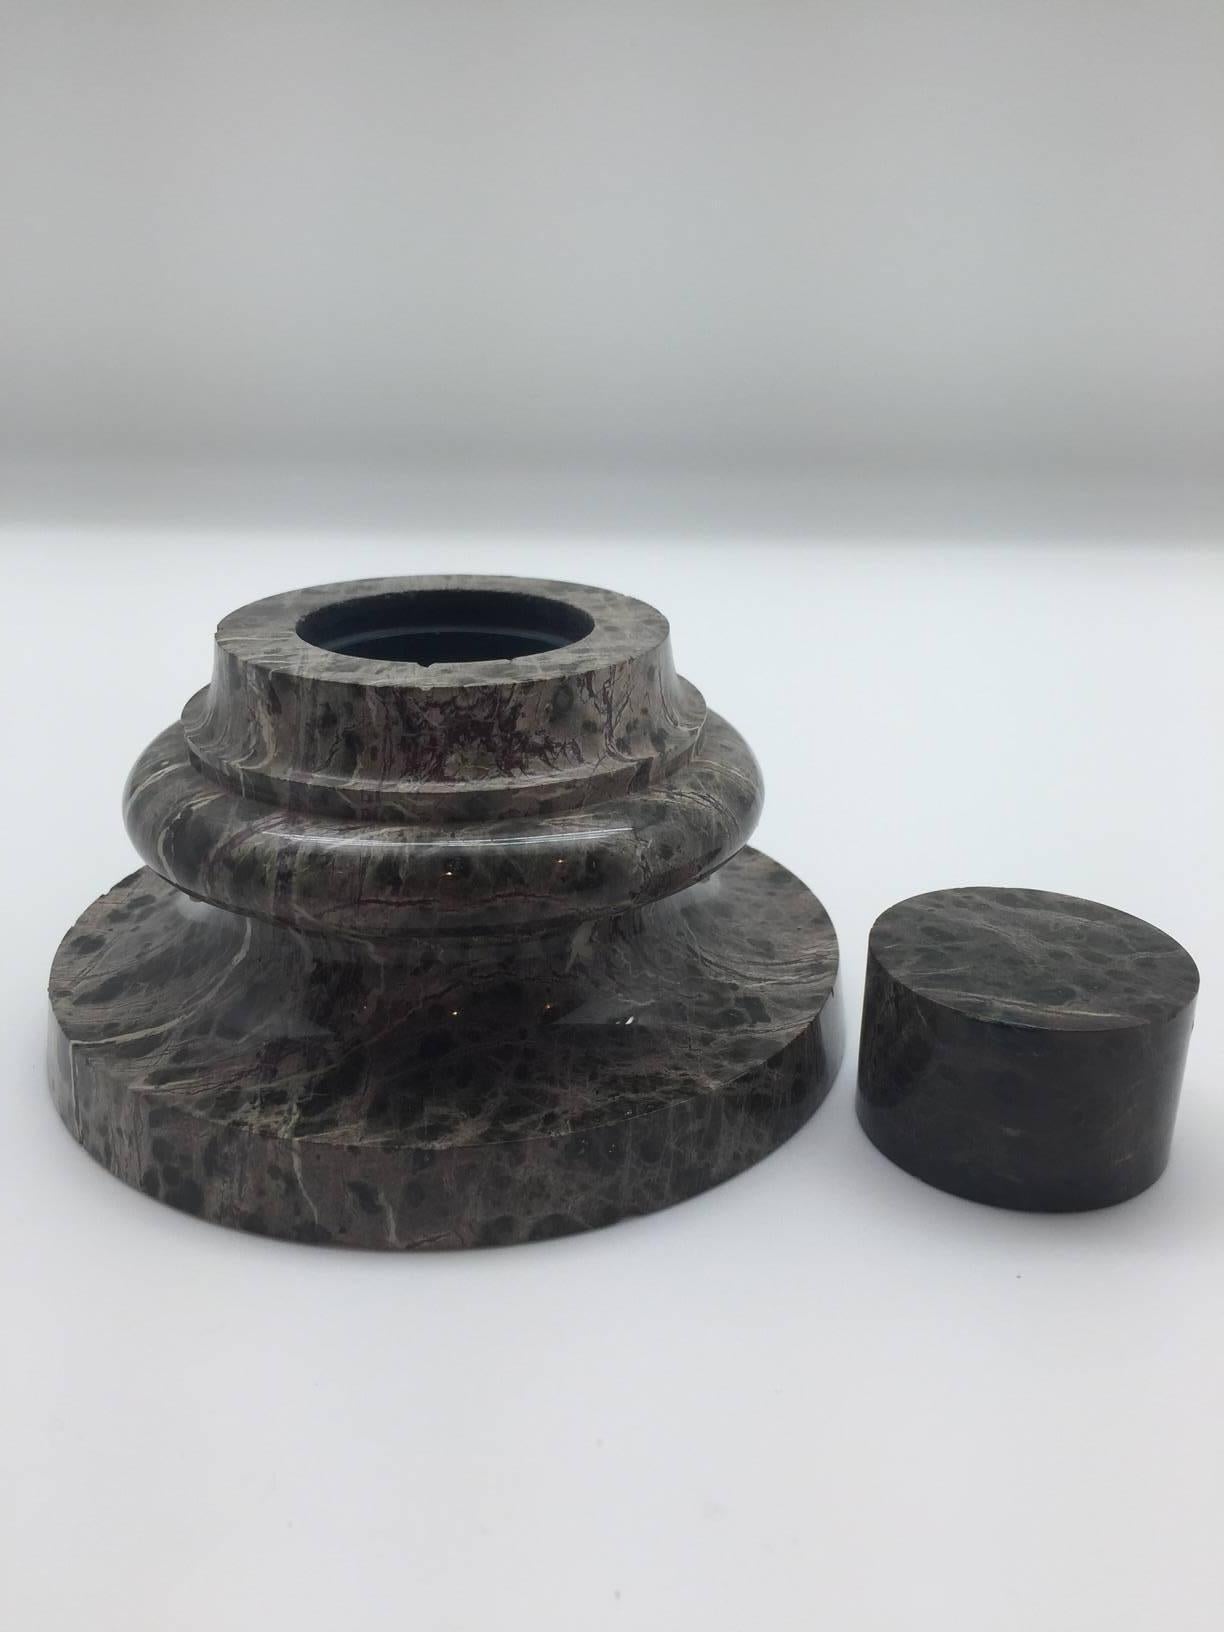 English 19th century cornish serpentine stone inkwell in the form of a neoclassical or Grand Tour turned column base with original fitted lid. Cornish serpentine is from the Lizard Peninsula in Cornwall, England. This mottled stone, which can also